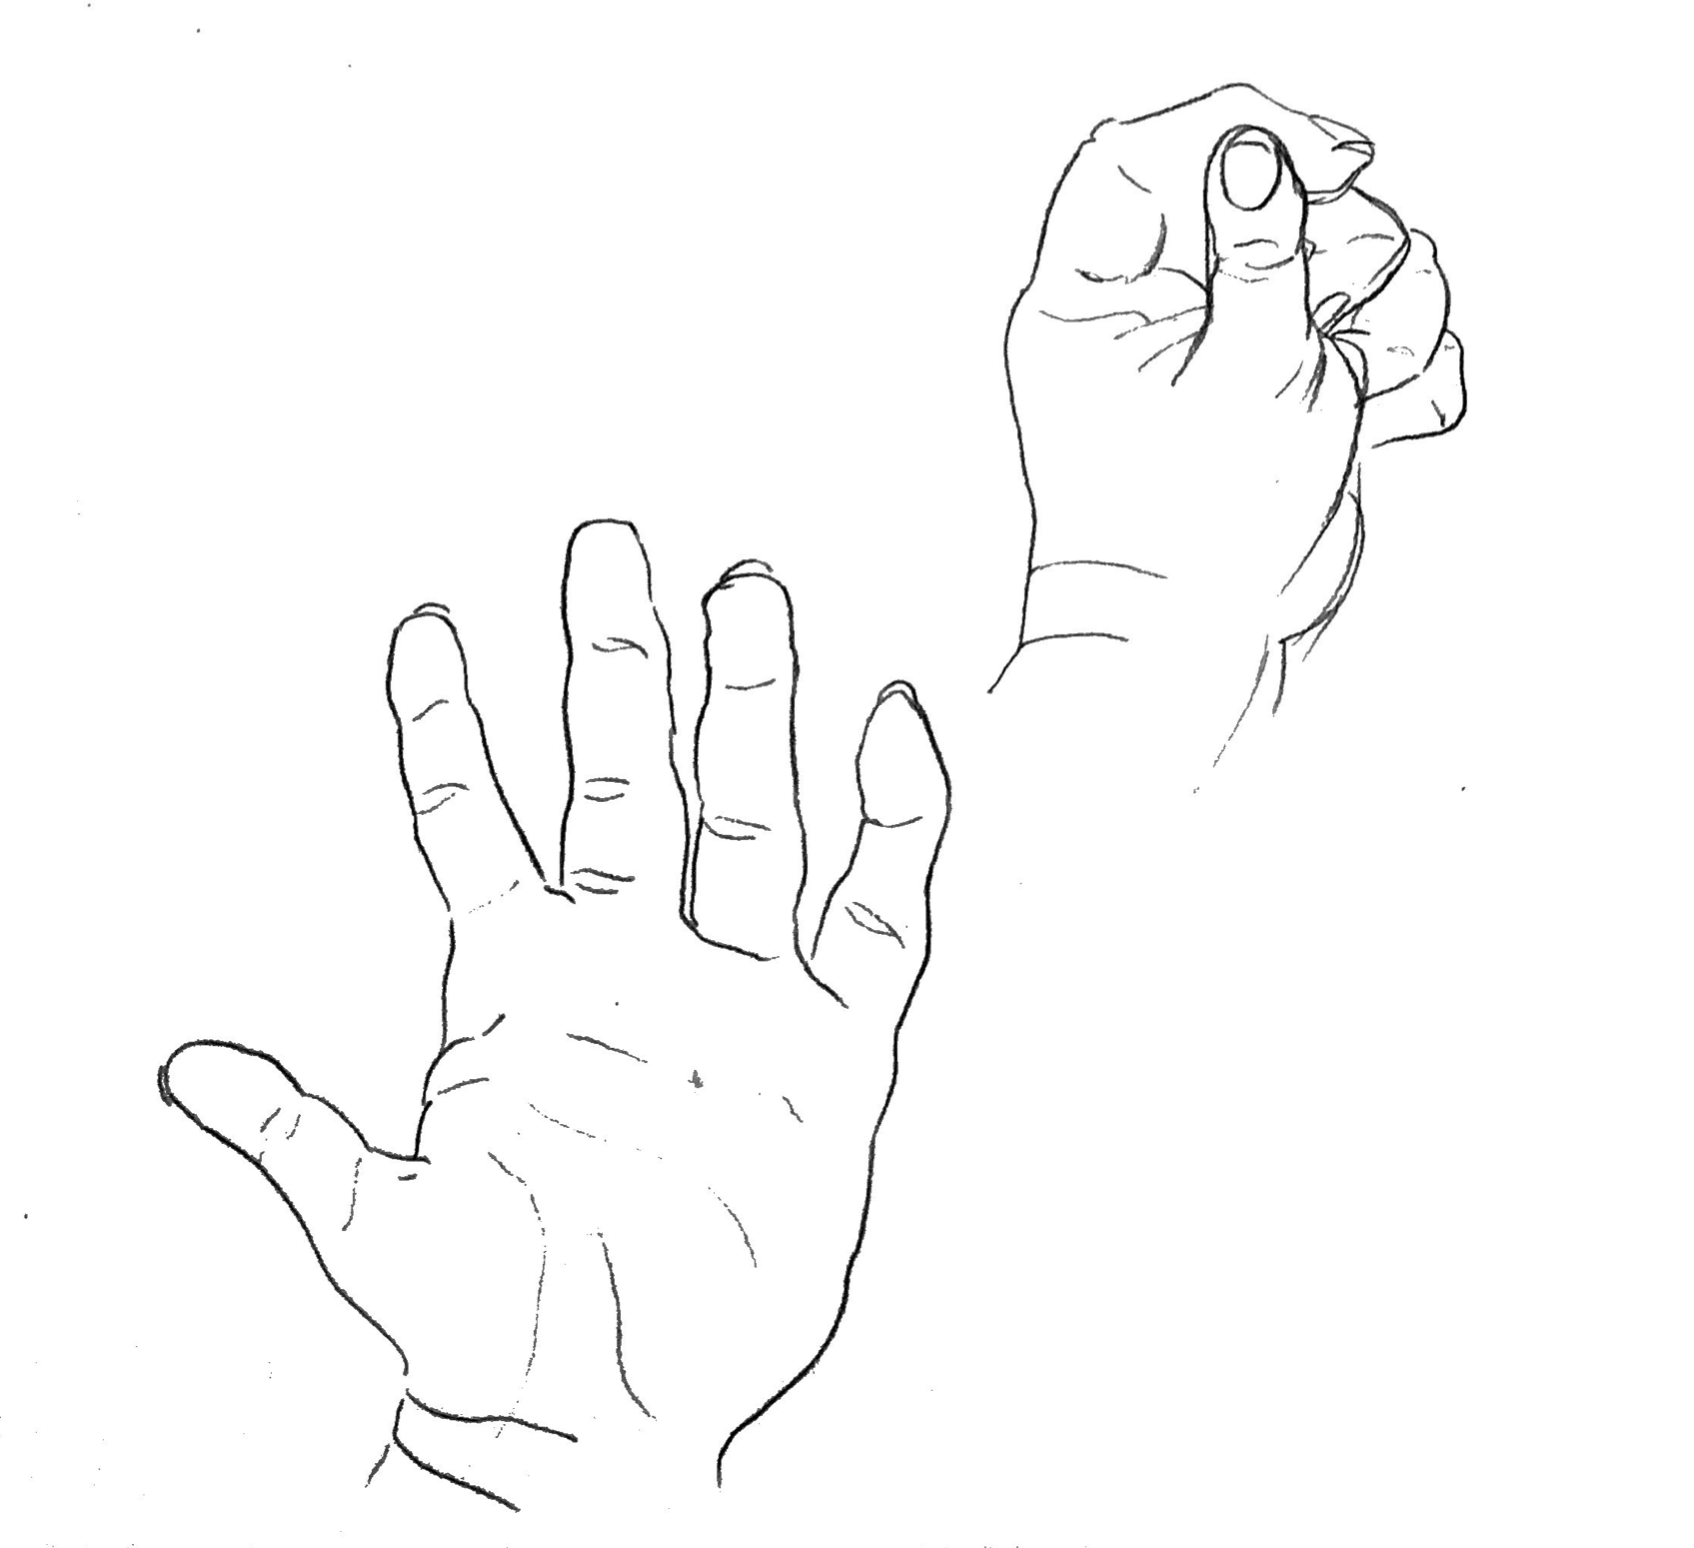 drawing of two hands